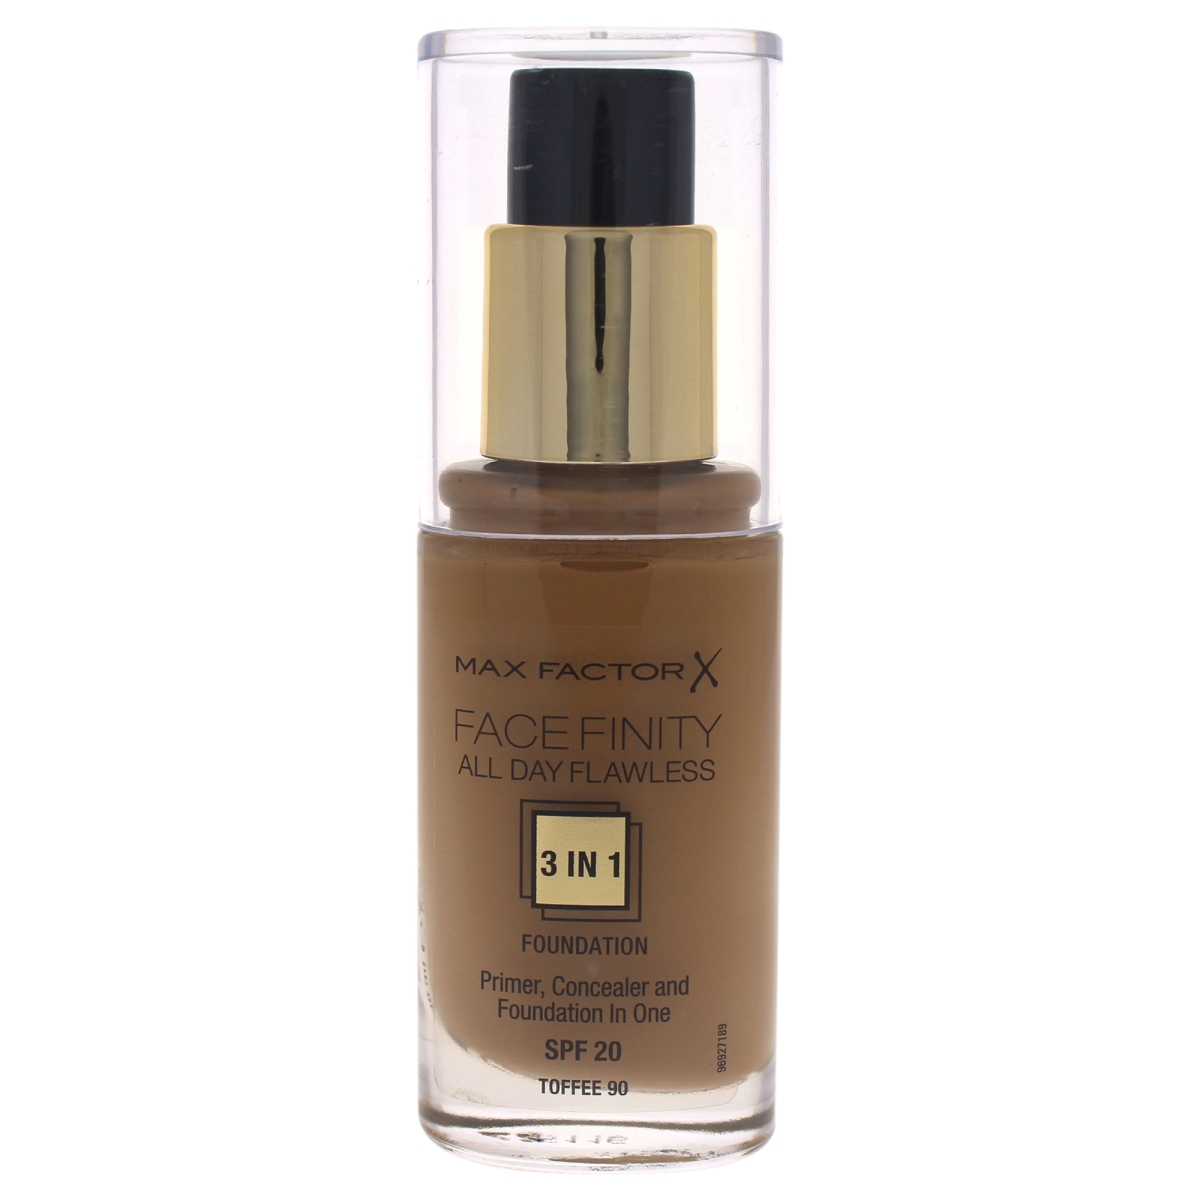 W-c-11239 30 Ml No. 90 Spf20 Facefinity All Day Flawless 3-in-1 Foundation - Toffee For Women